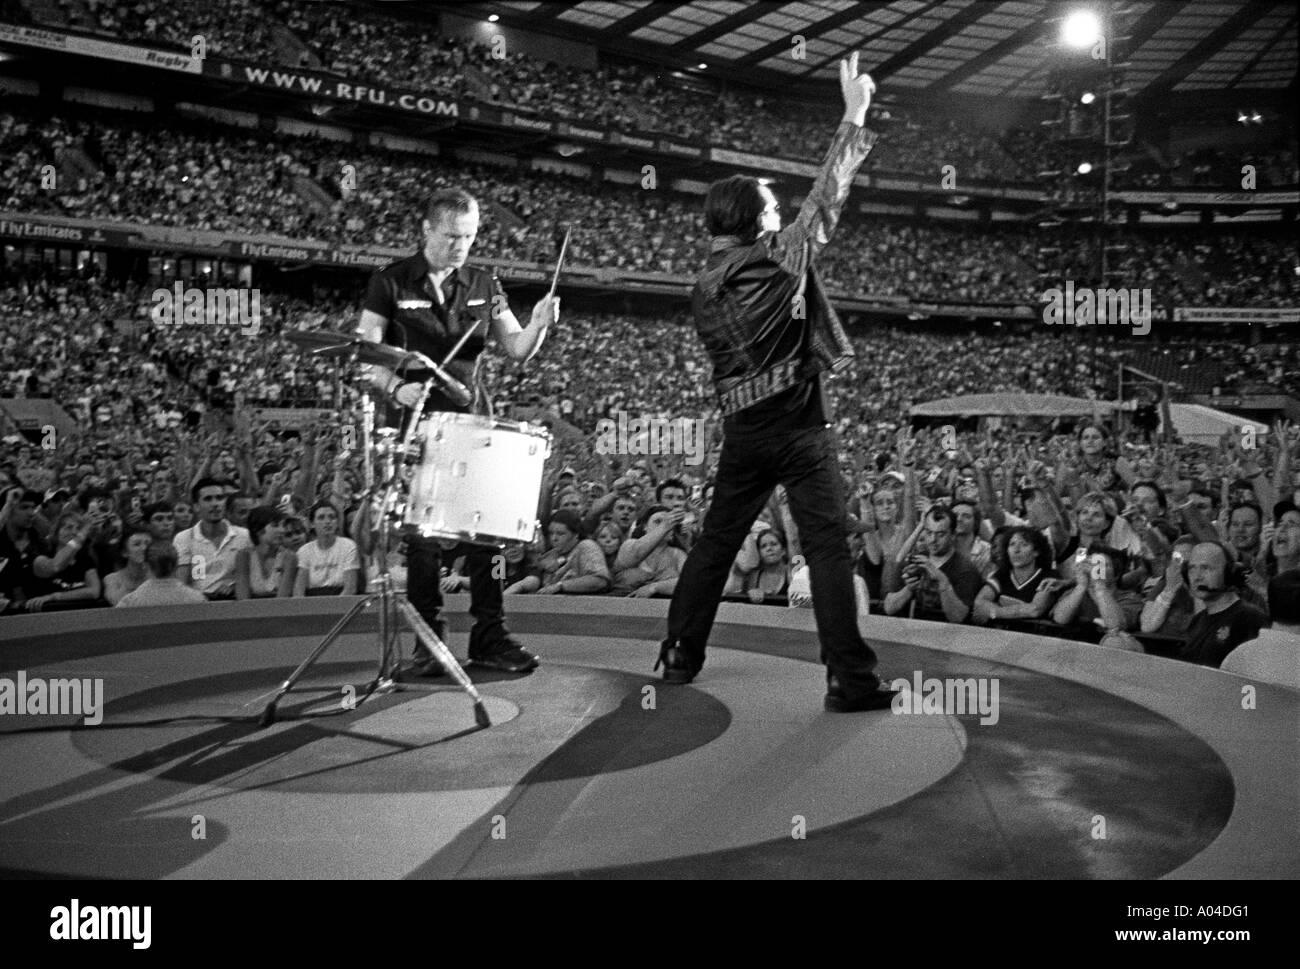 Larry and Bono  from U2 during the song Love and Peace live on The Vertigo Tour at  Twickenham Stadium Stock Photo